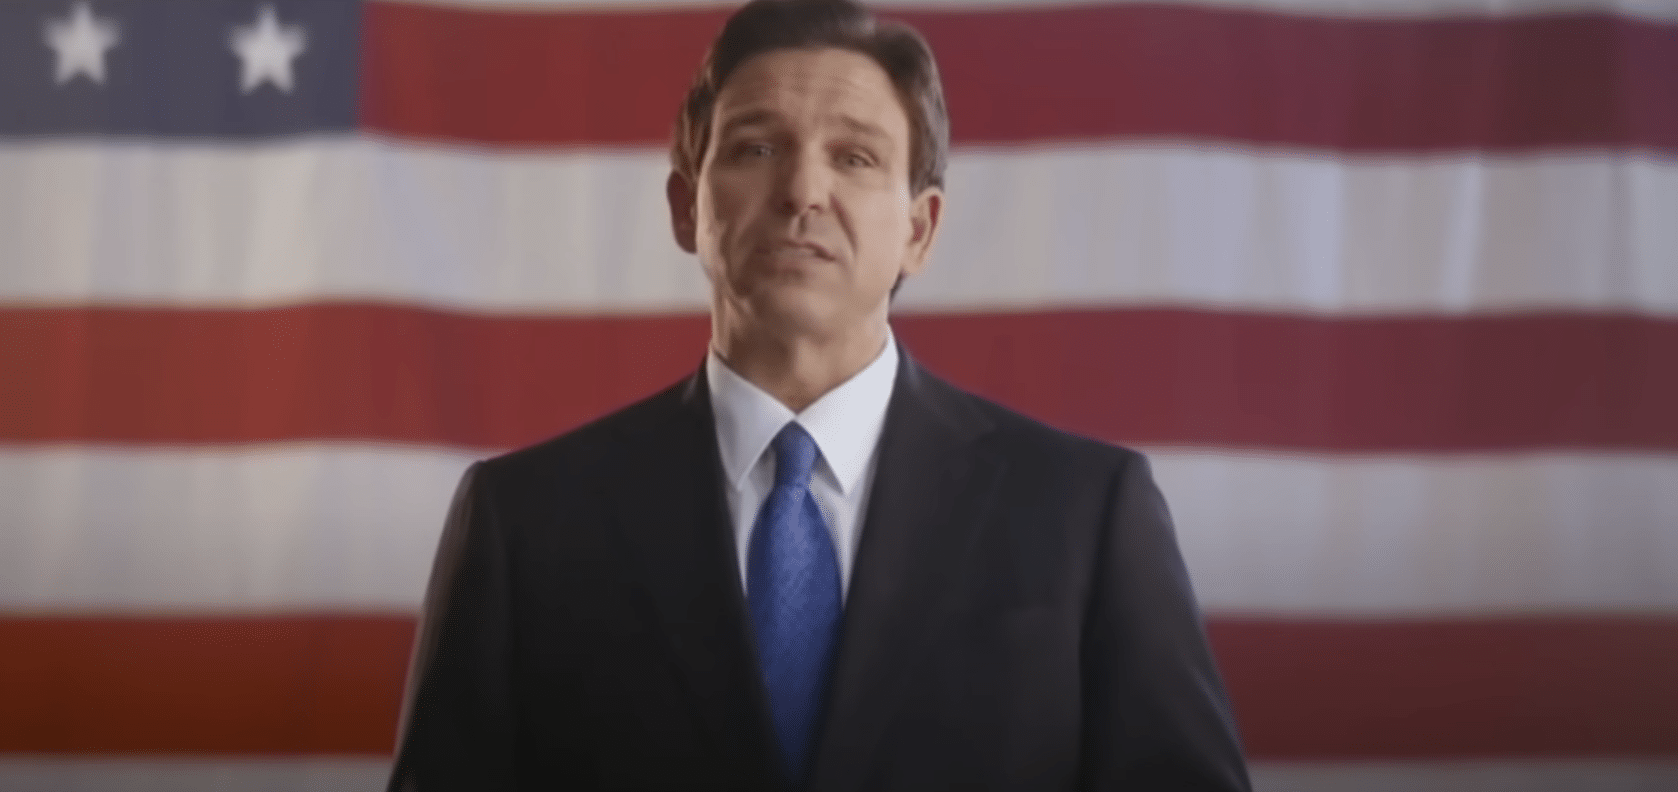 Cringe: DeSantis launches presidential campaign with ‘Great American Comeback’ video